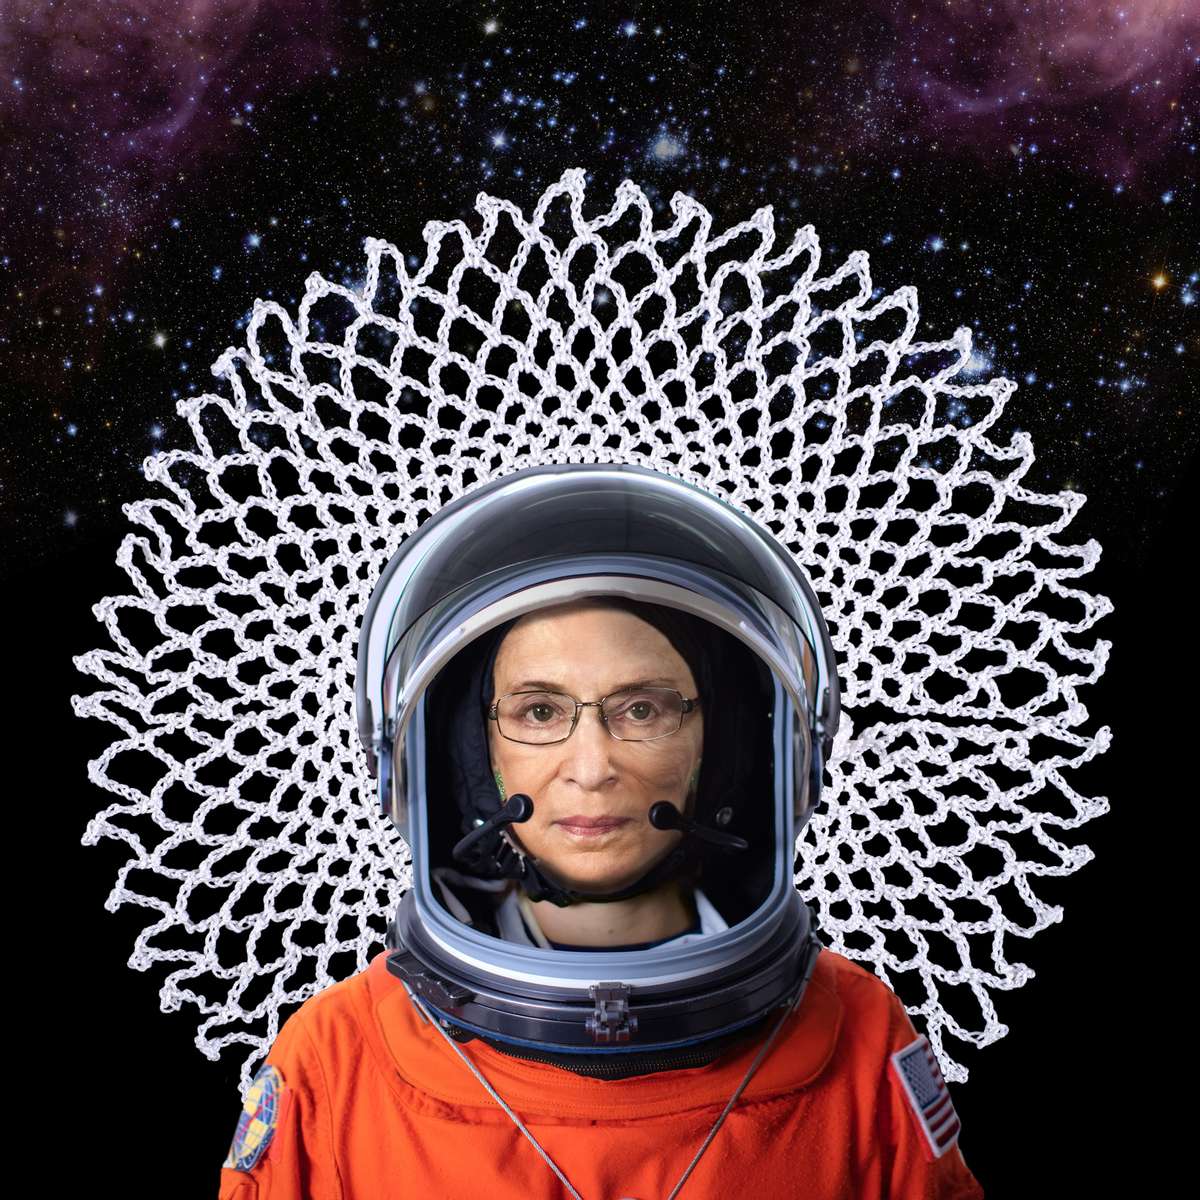 Ruth Bader Ginsburg in Space, 2021